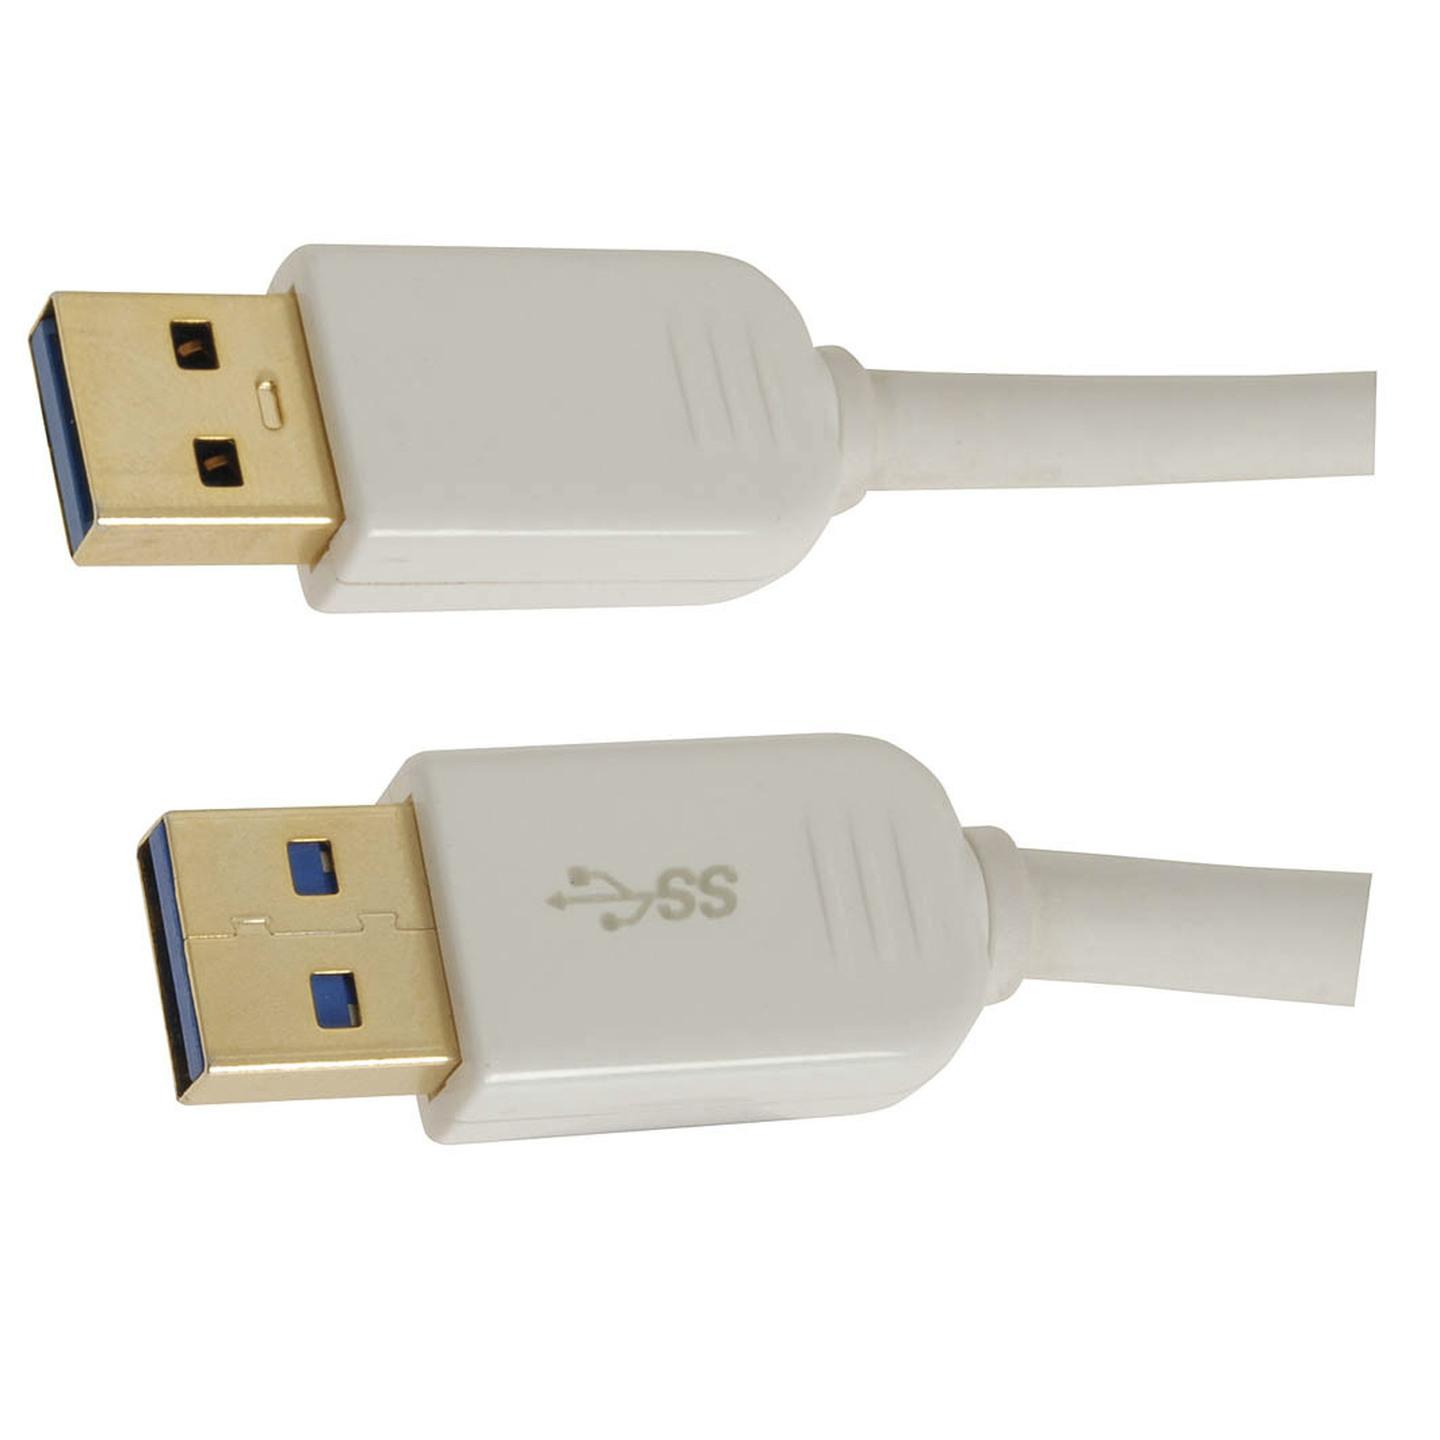 High Quality USB 3.0 A male to A male Cable - 2m